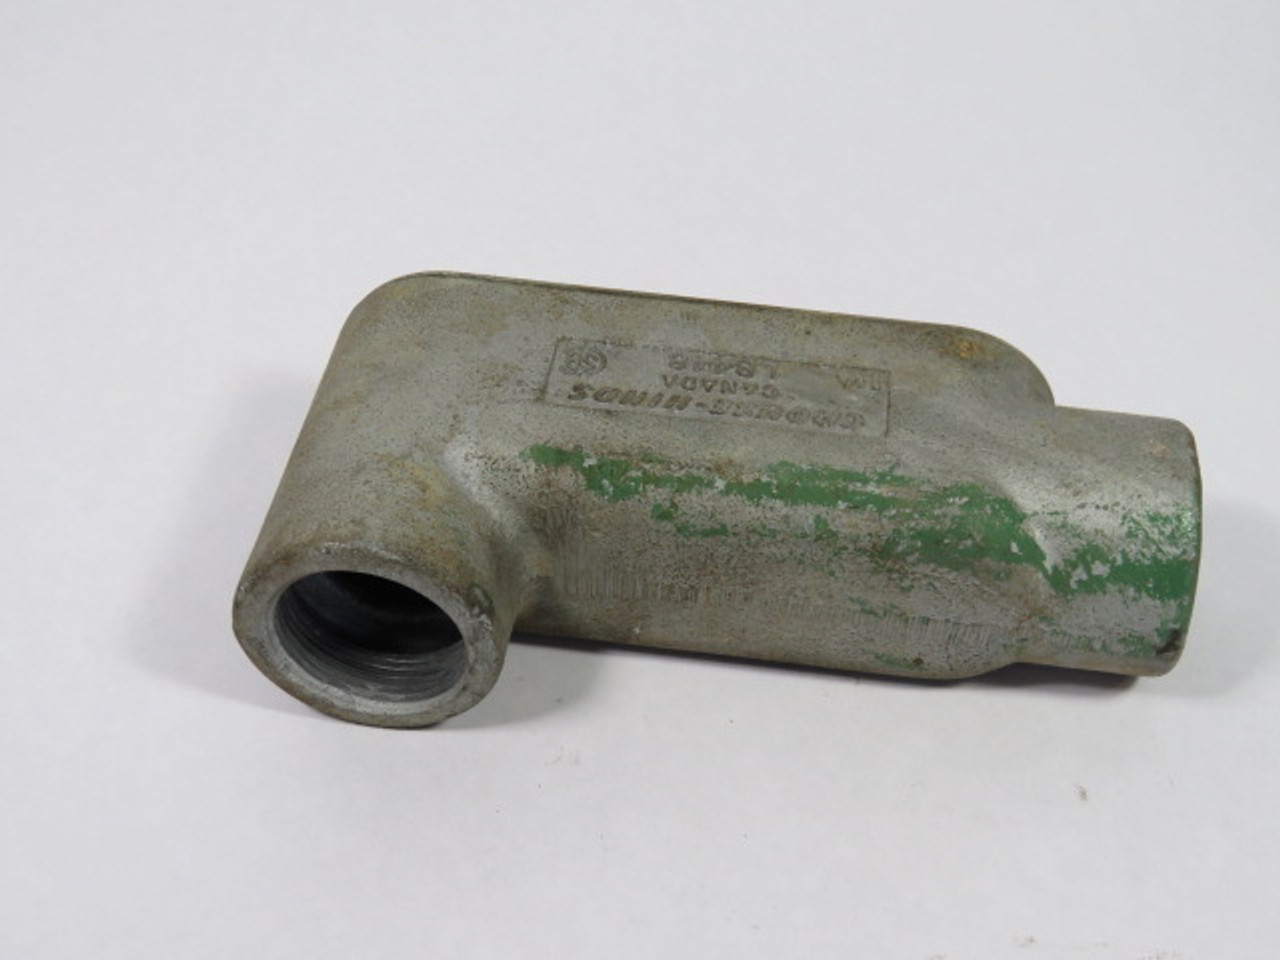 Crouse-Hinds LB448 Conduit Body W/ Cover L-Shaped 2-Hole 1-1/4" NPT USED